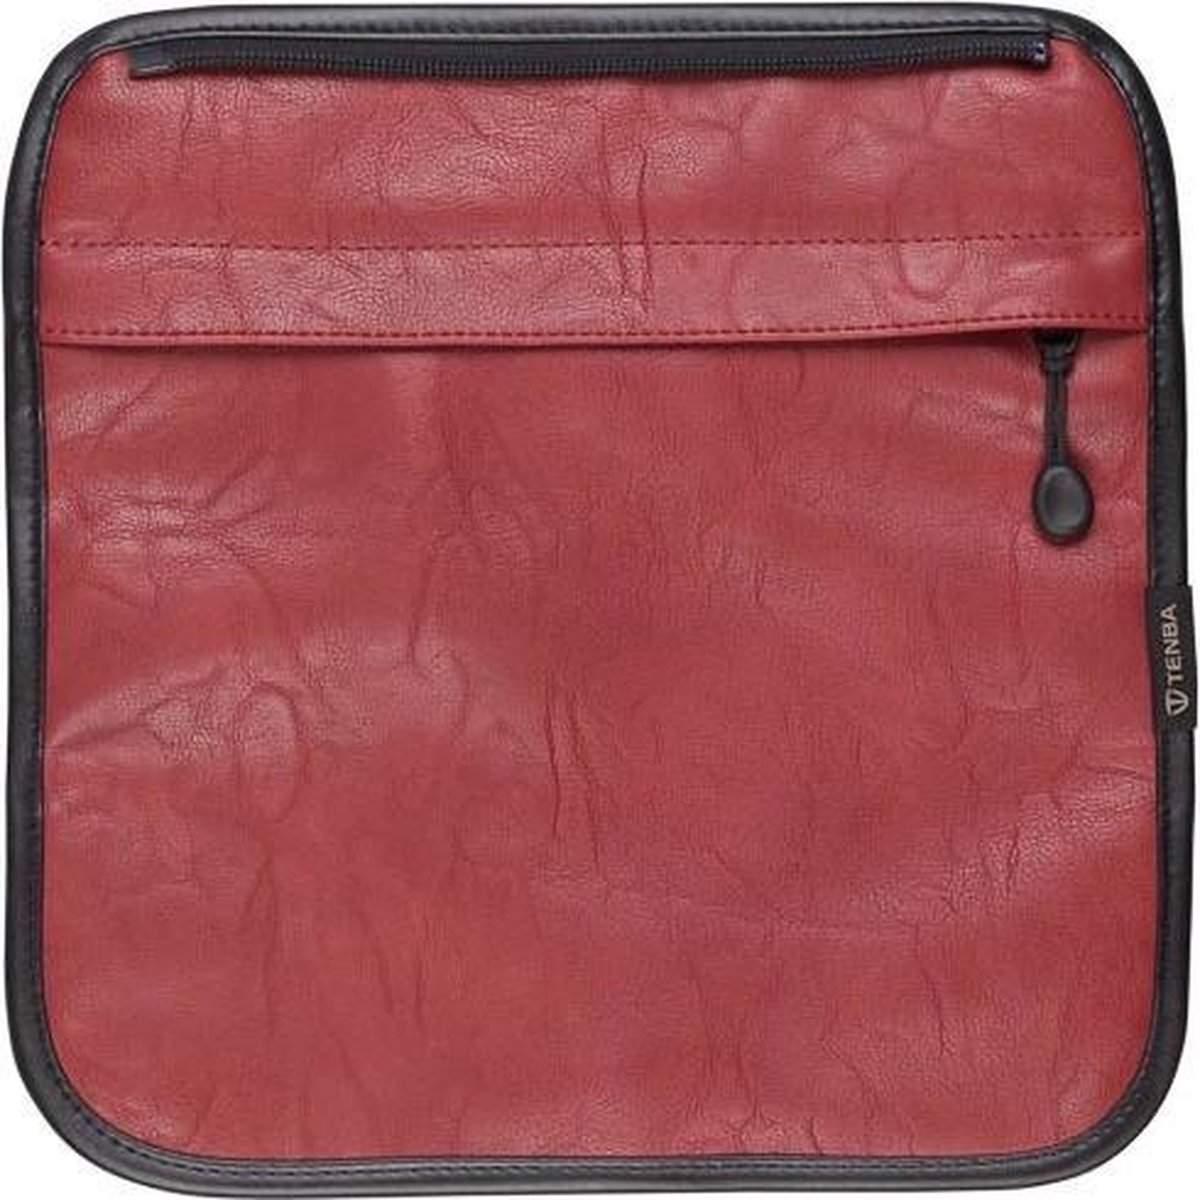 Tenba Switch Cover 7 Brick Red faux Leather